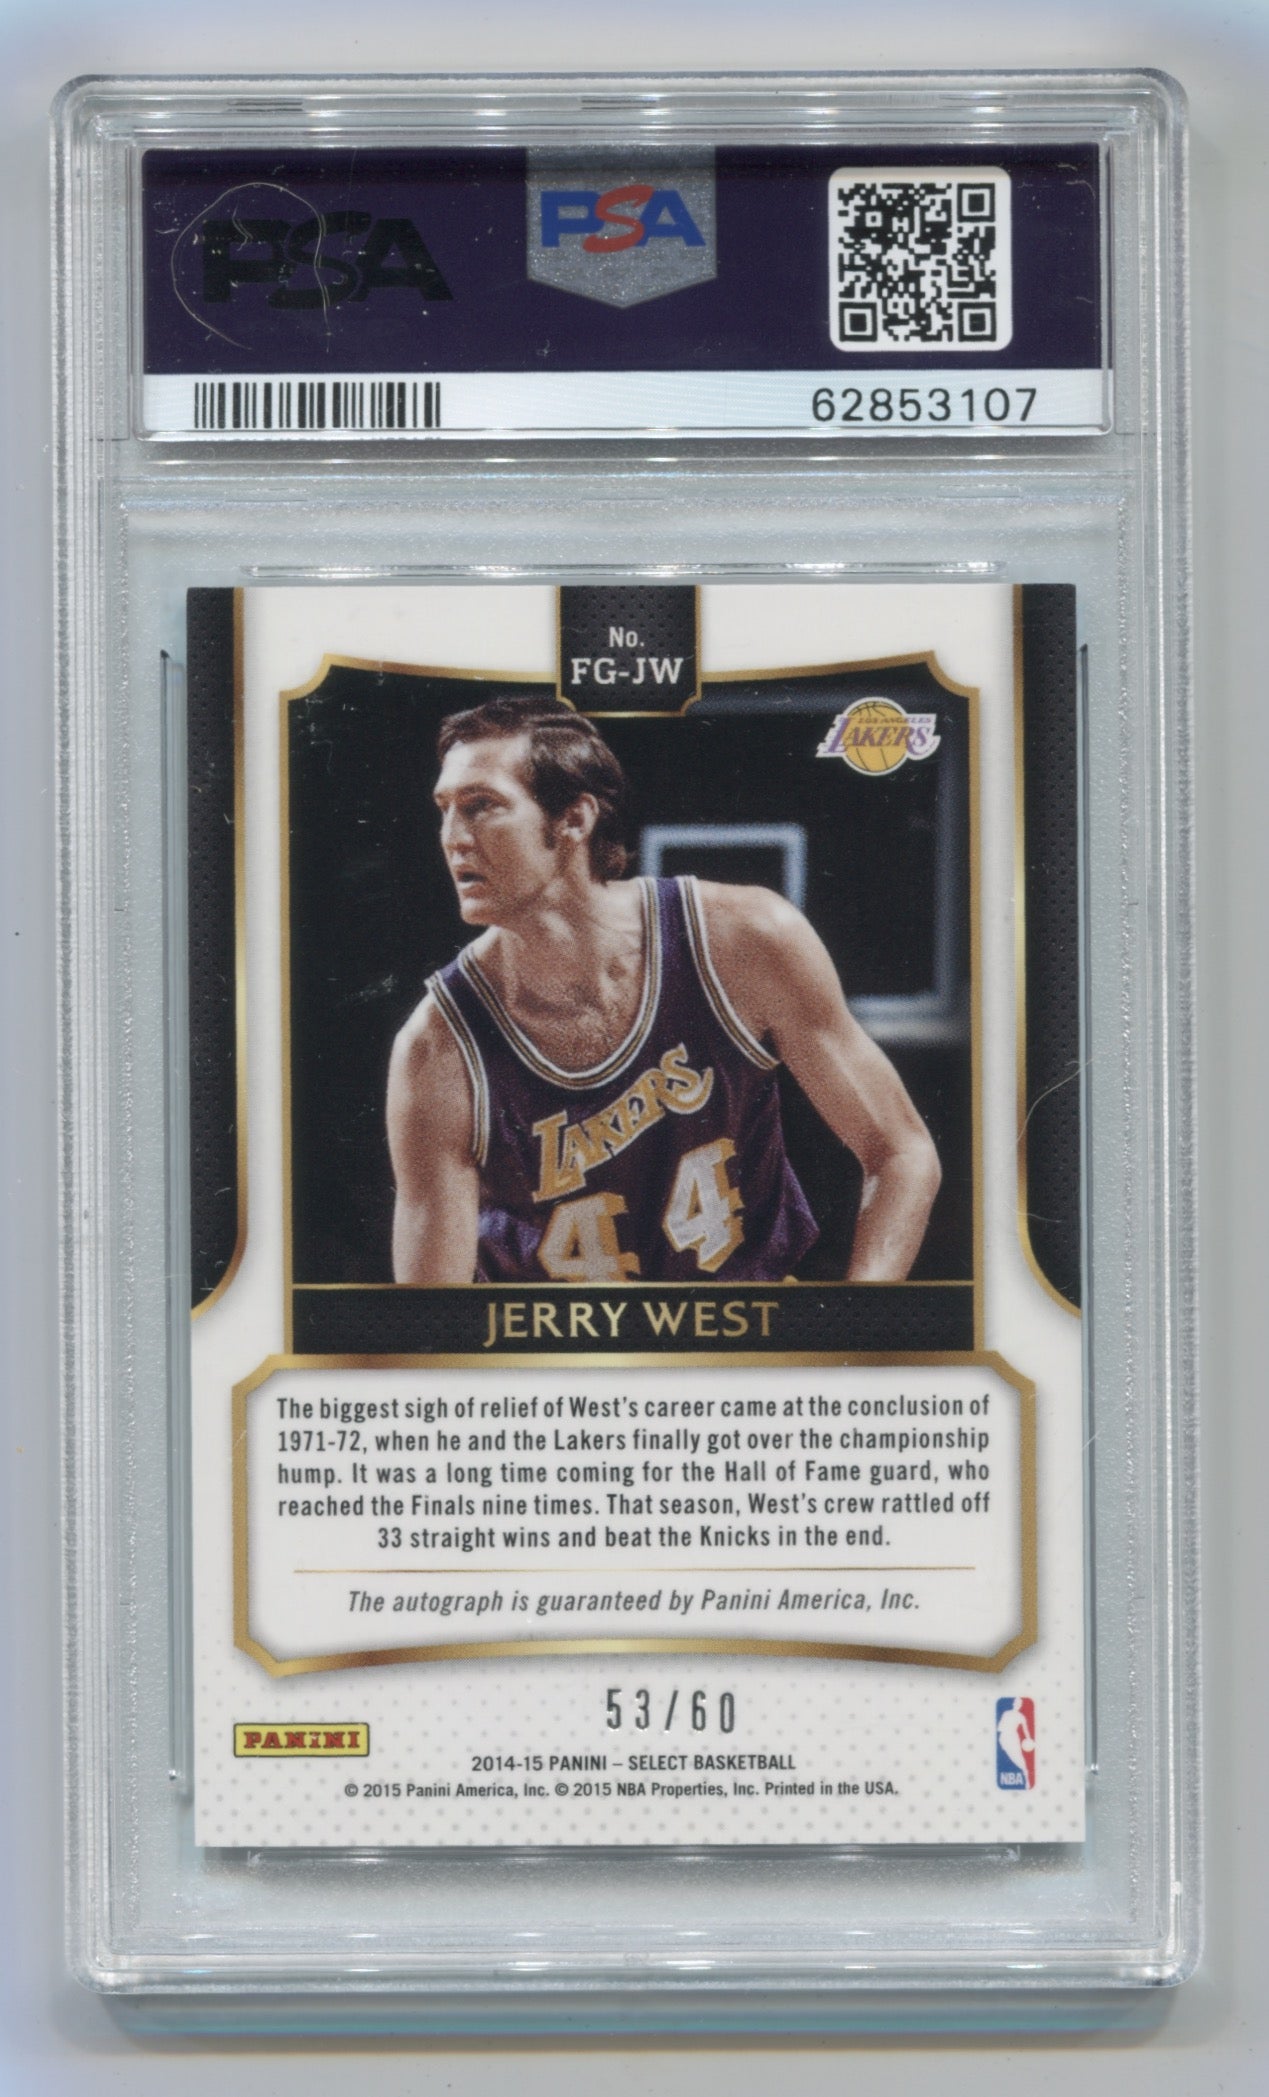 2014-15 Select Fame Game Autographs #4 Jerry West #53/60 PSA 9 | Eastridge Sports Cards